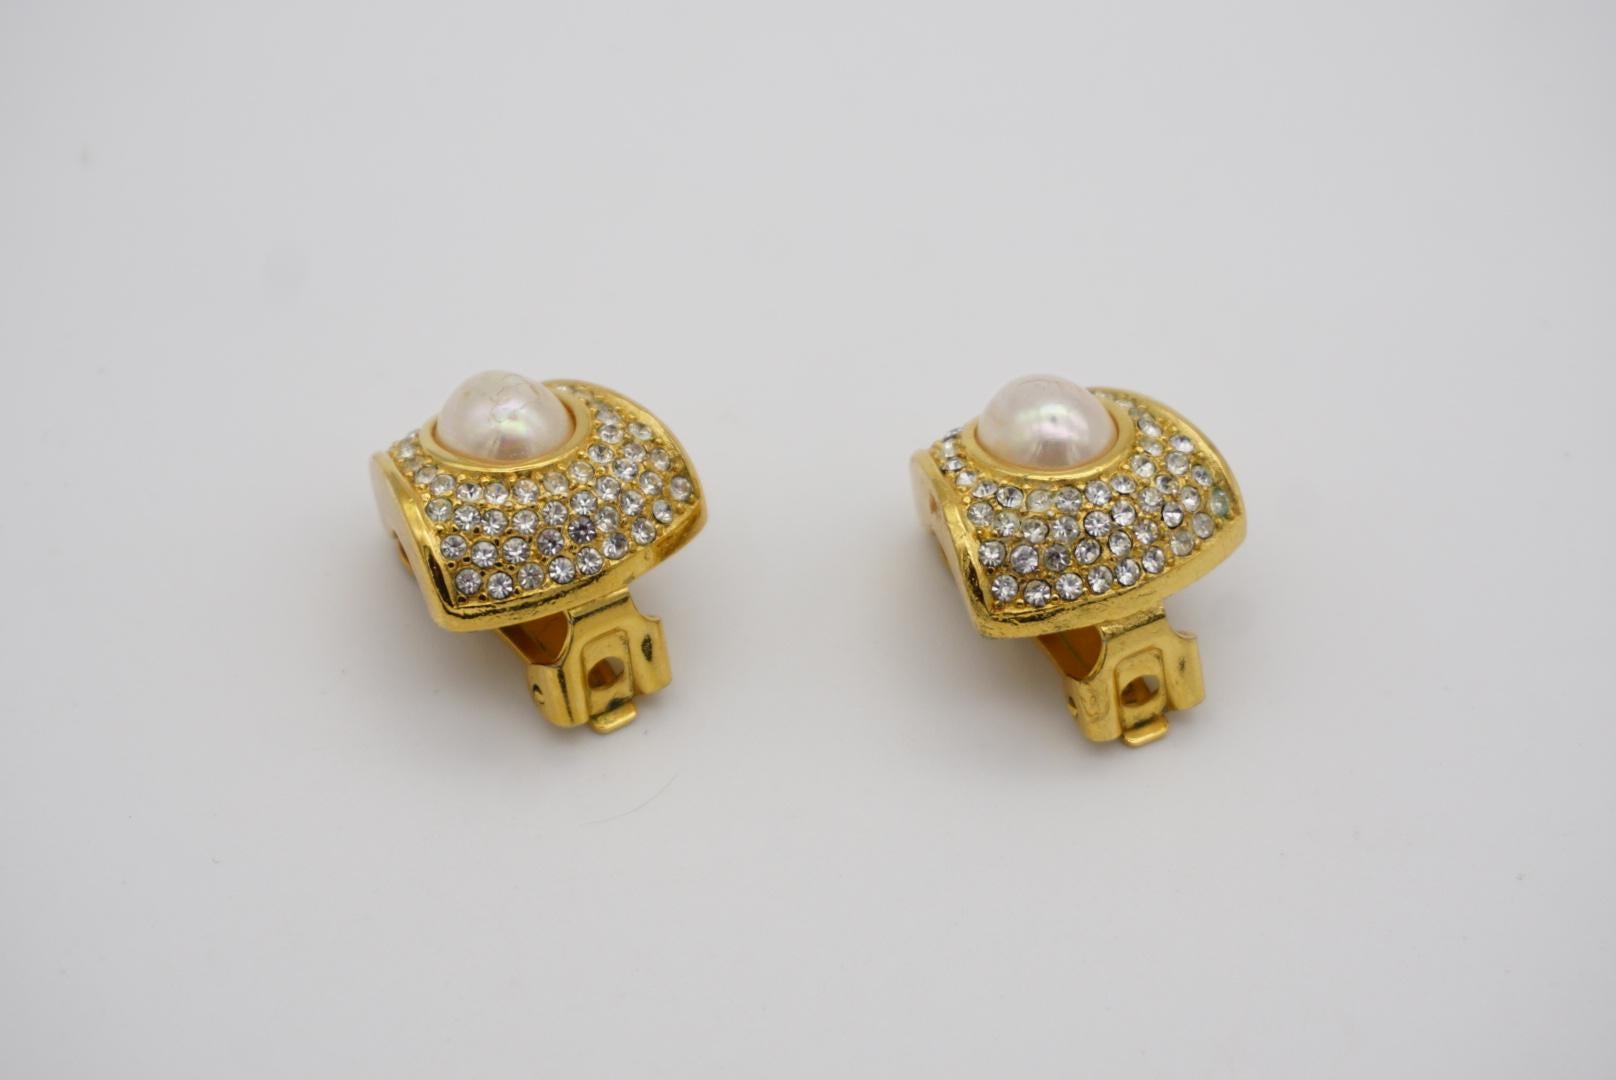 Christian Dior Vintage 1980s White Oval Pearl Crystals Fan Gold Clip Earrings For Sale 3